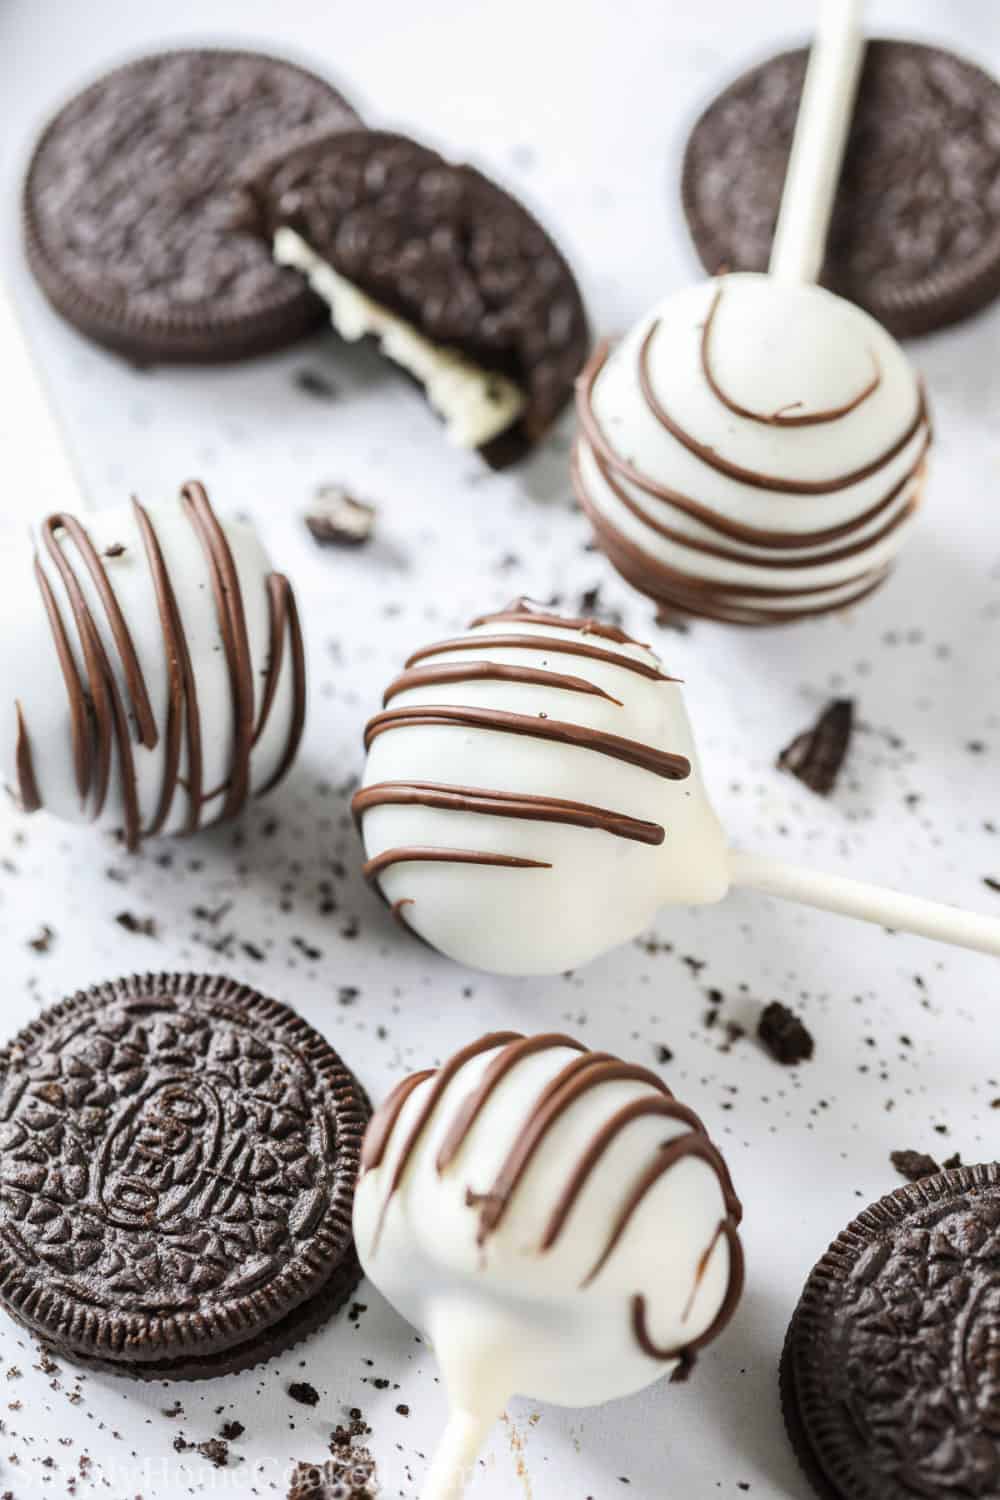 Corrupt tong bijgeloof Oreo Cake Pops (VIDEO) - Simply Home Cooked